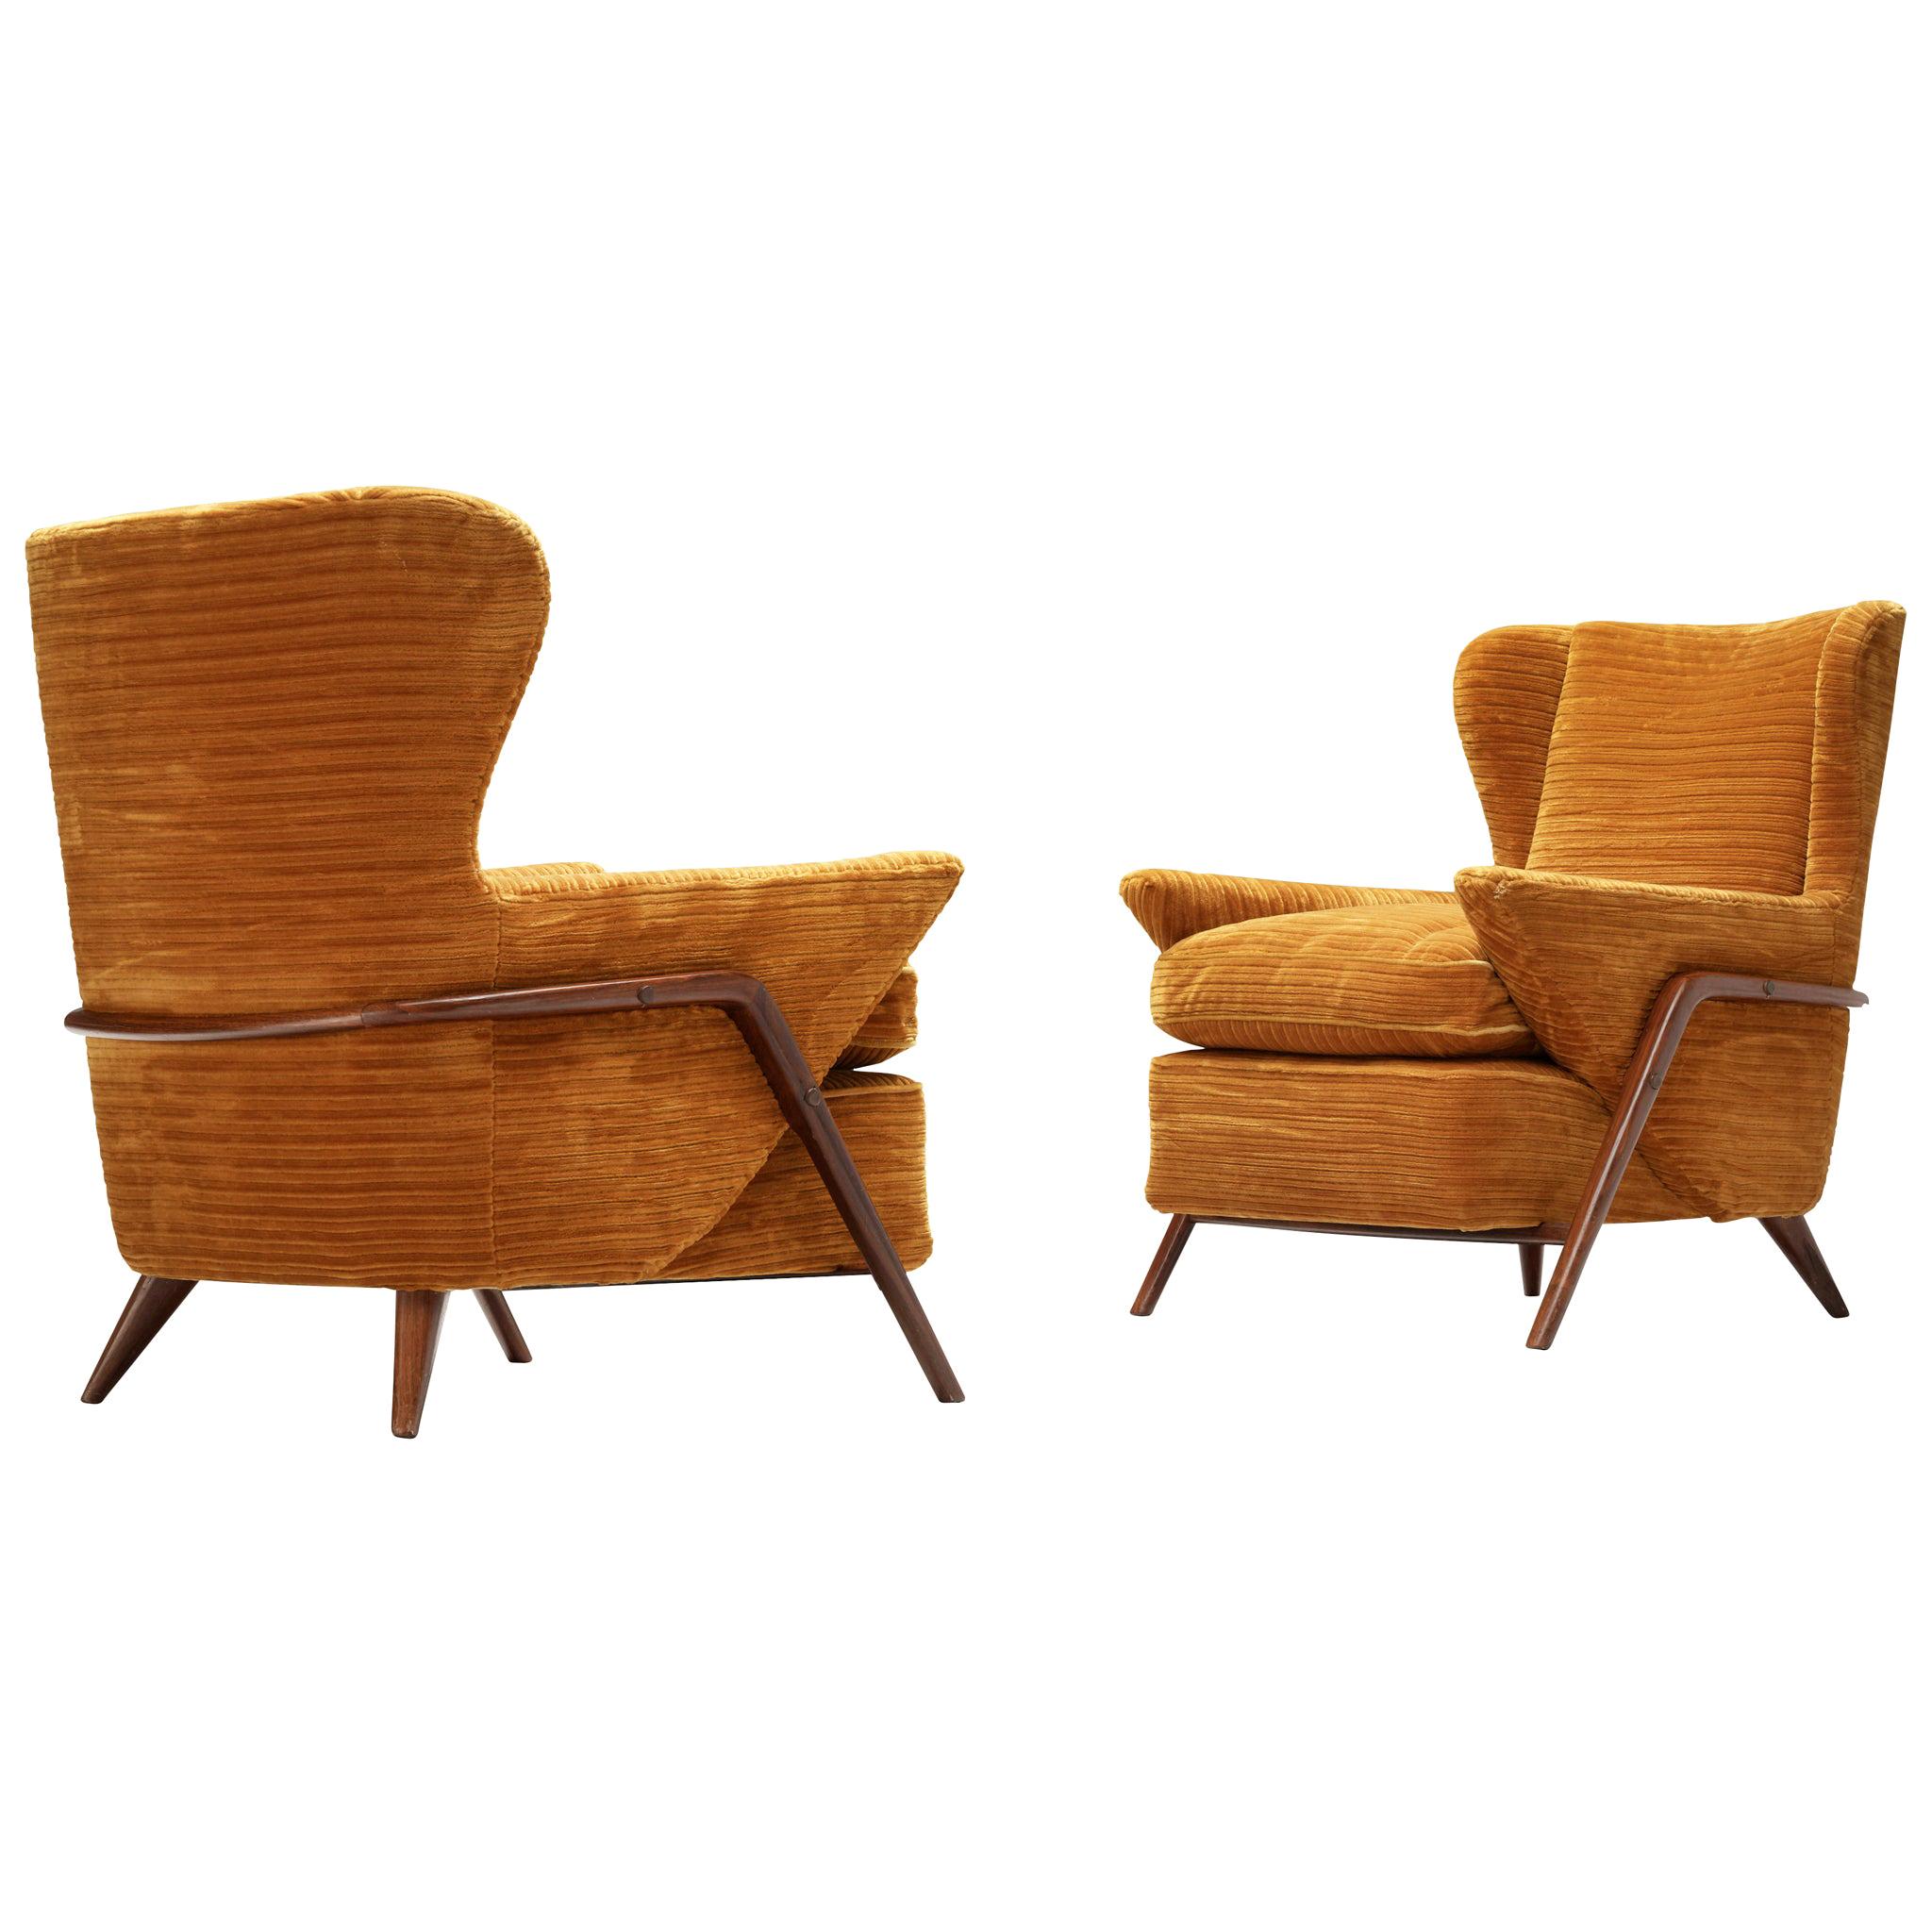 Pair of Italian Wingback Chairs Textured Upholstery